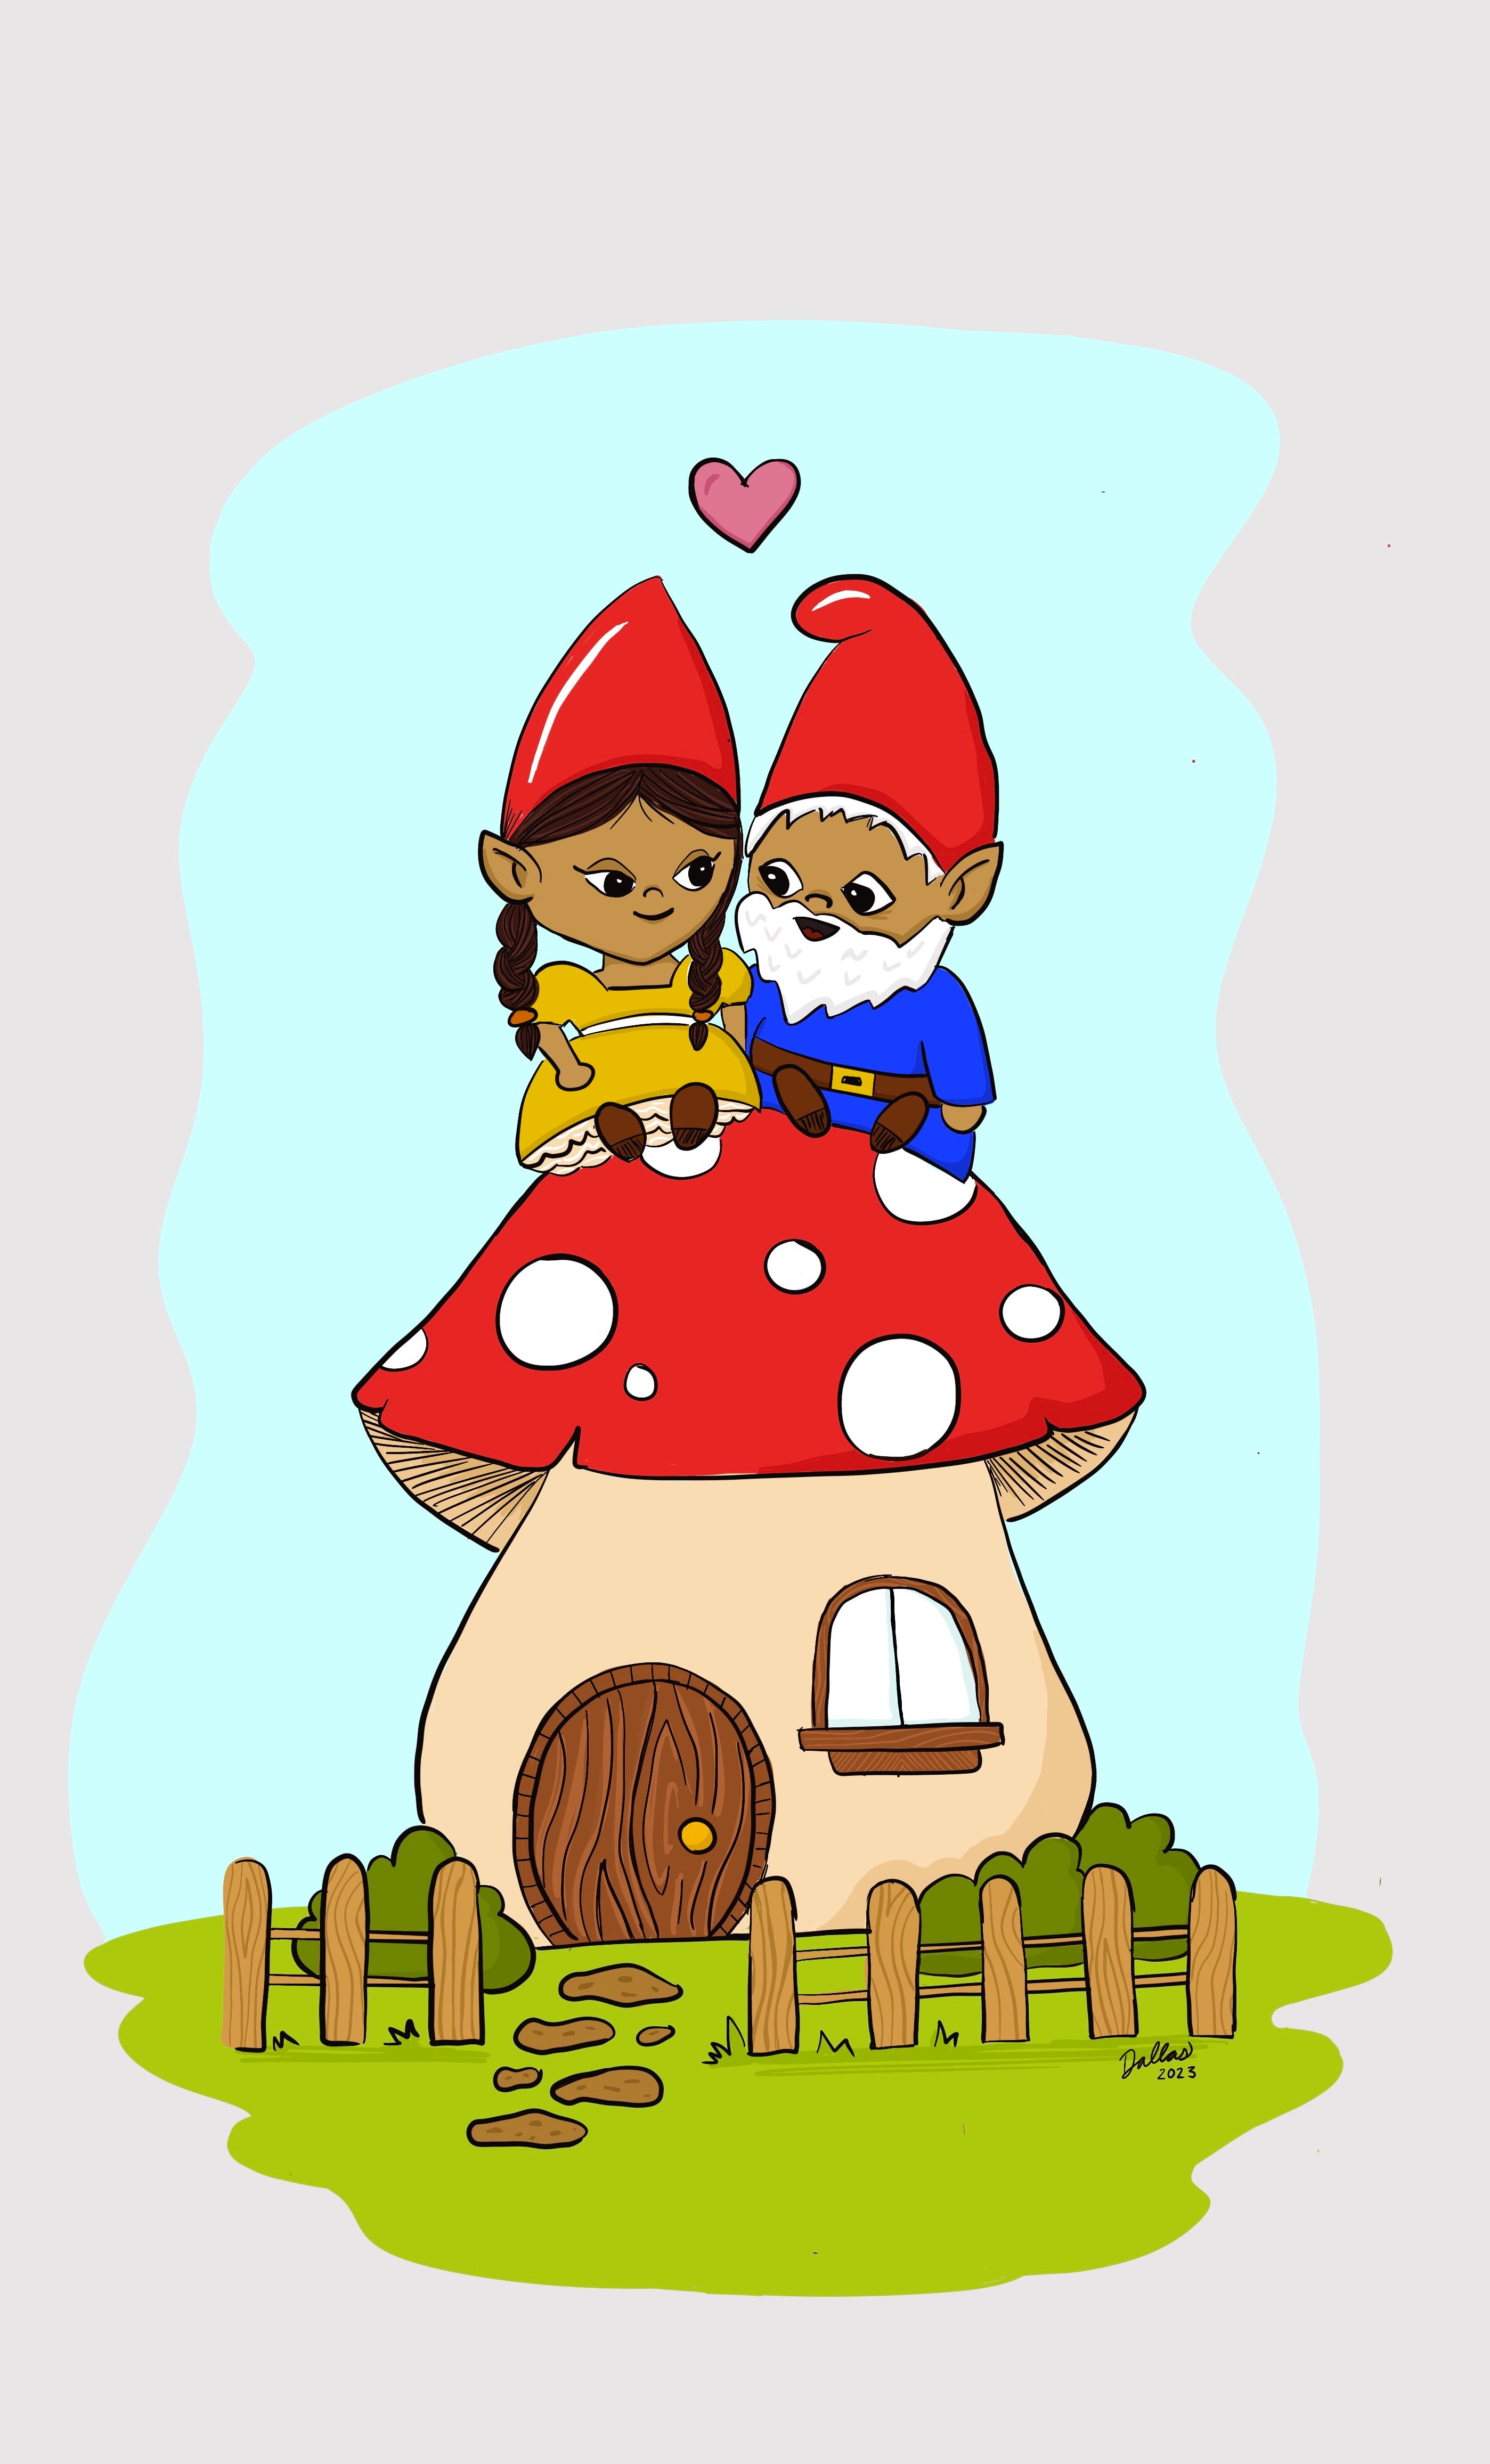 downloadable wallpaper of the gnome couple mushroom cottage print in digital form